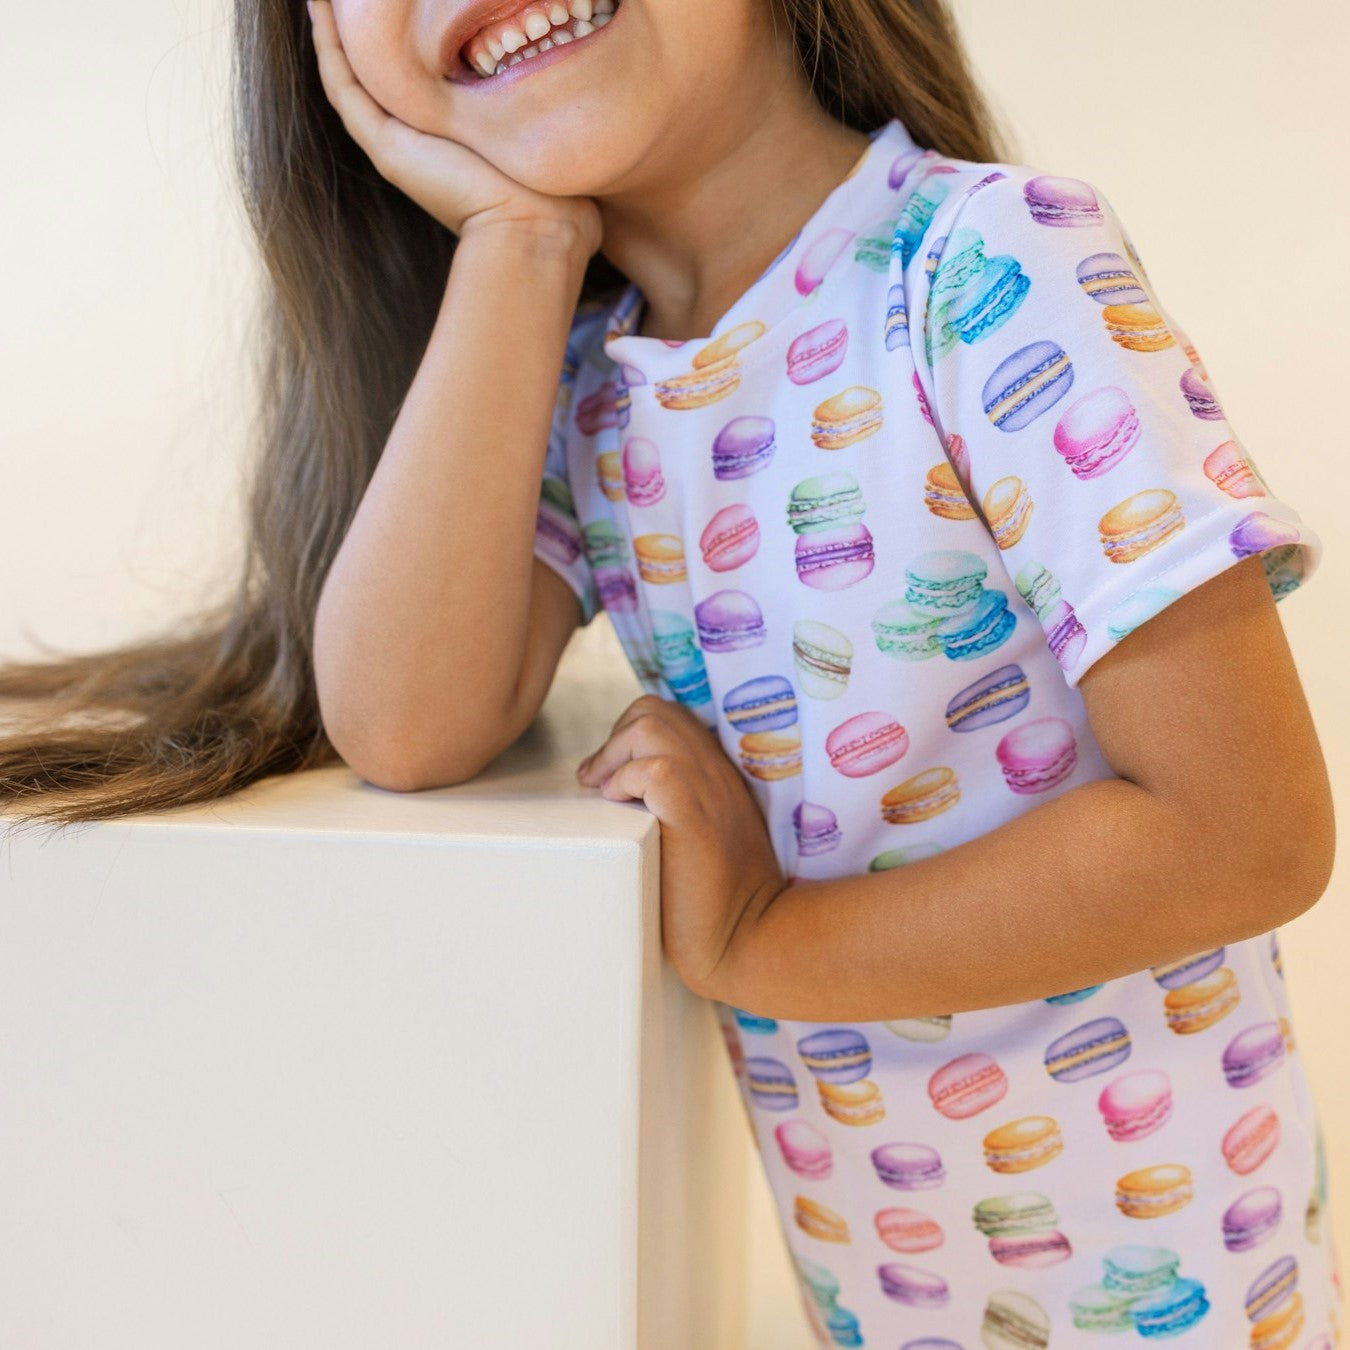 cute kids shirt with colorful macaron design